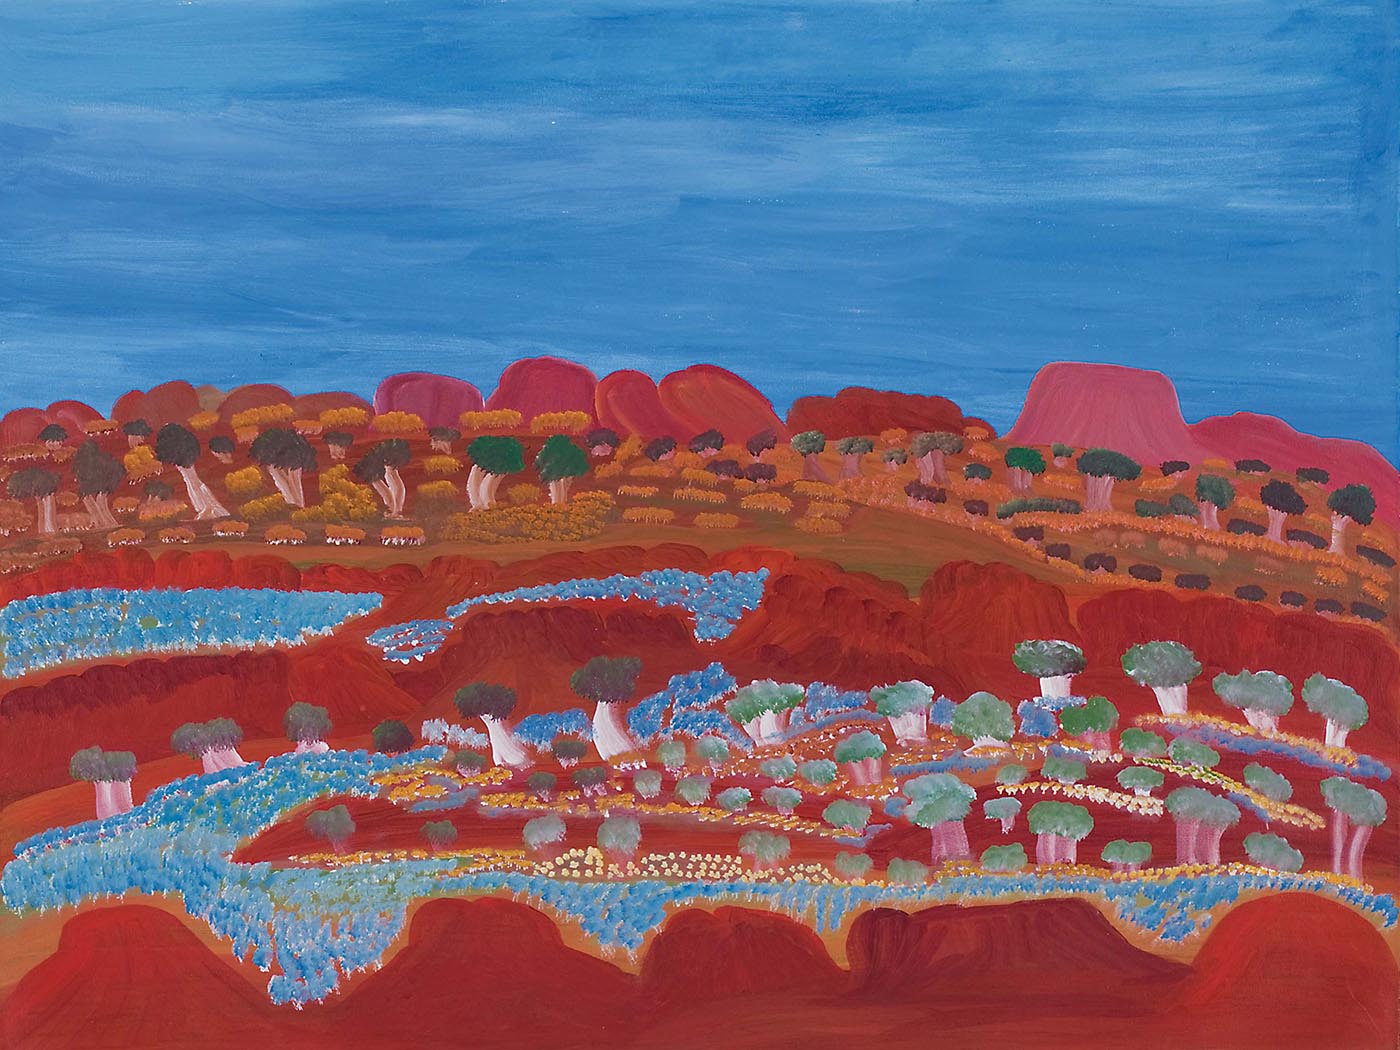 A painting on canvas with a range of orange-red rock formations lying low against a blue sky backdrop. In front of the formations are green and light brown trees and yellow-brown grass-like foliage. In the foreground are two horizontal rows of orange-red rock formations creating a valley-like appearance. The valley and some of the rock formations are covered in expanses of flowers in blue, yellow and cream as well as trees in green and beige-white. - click to view larger image